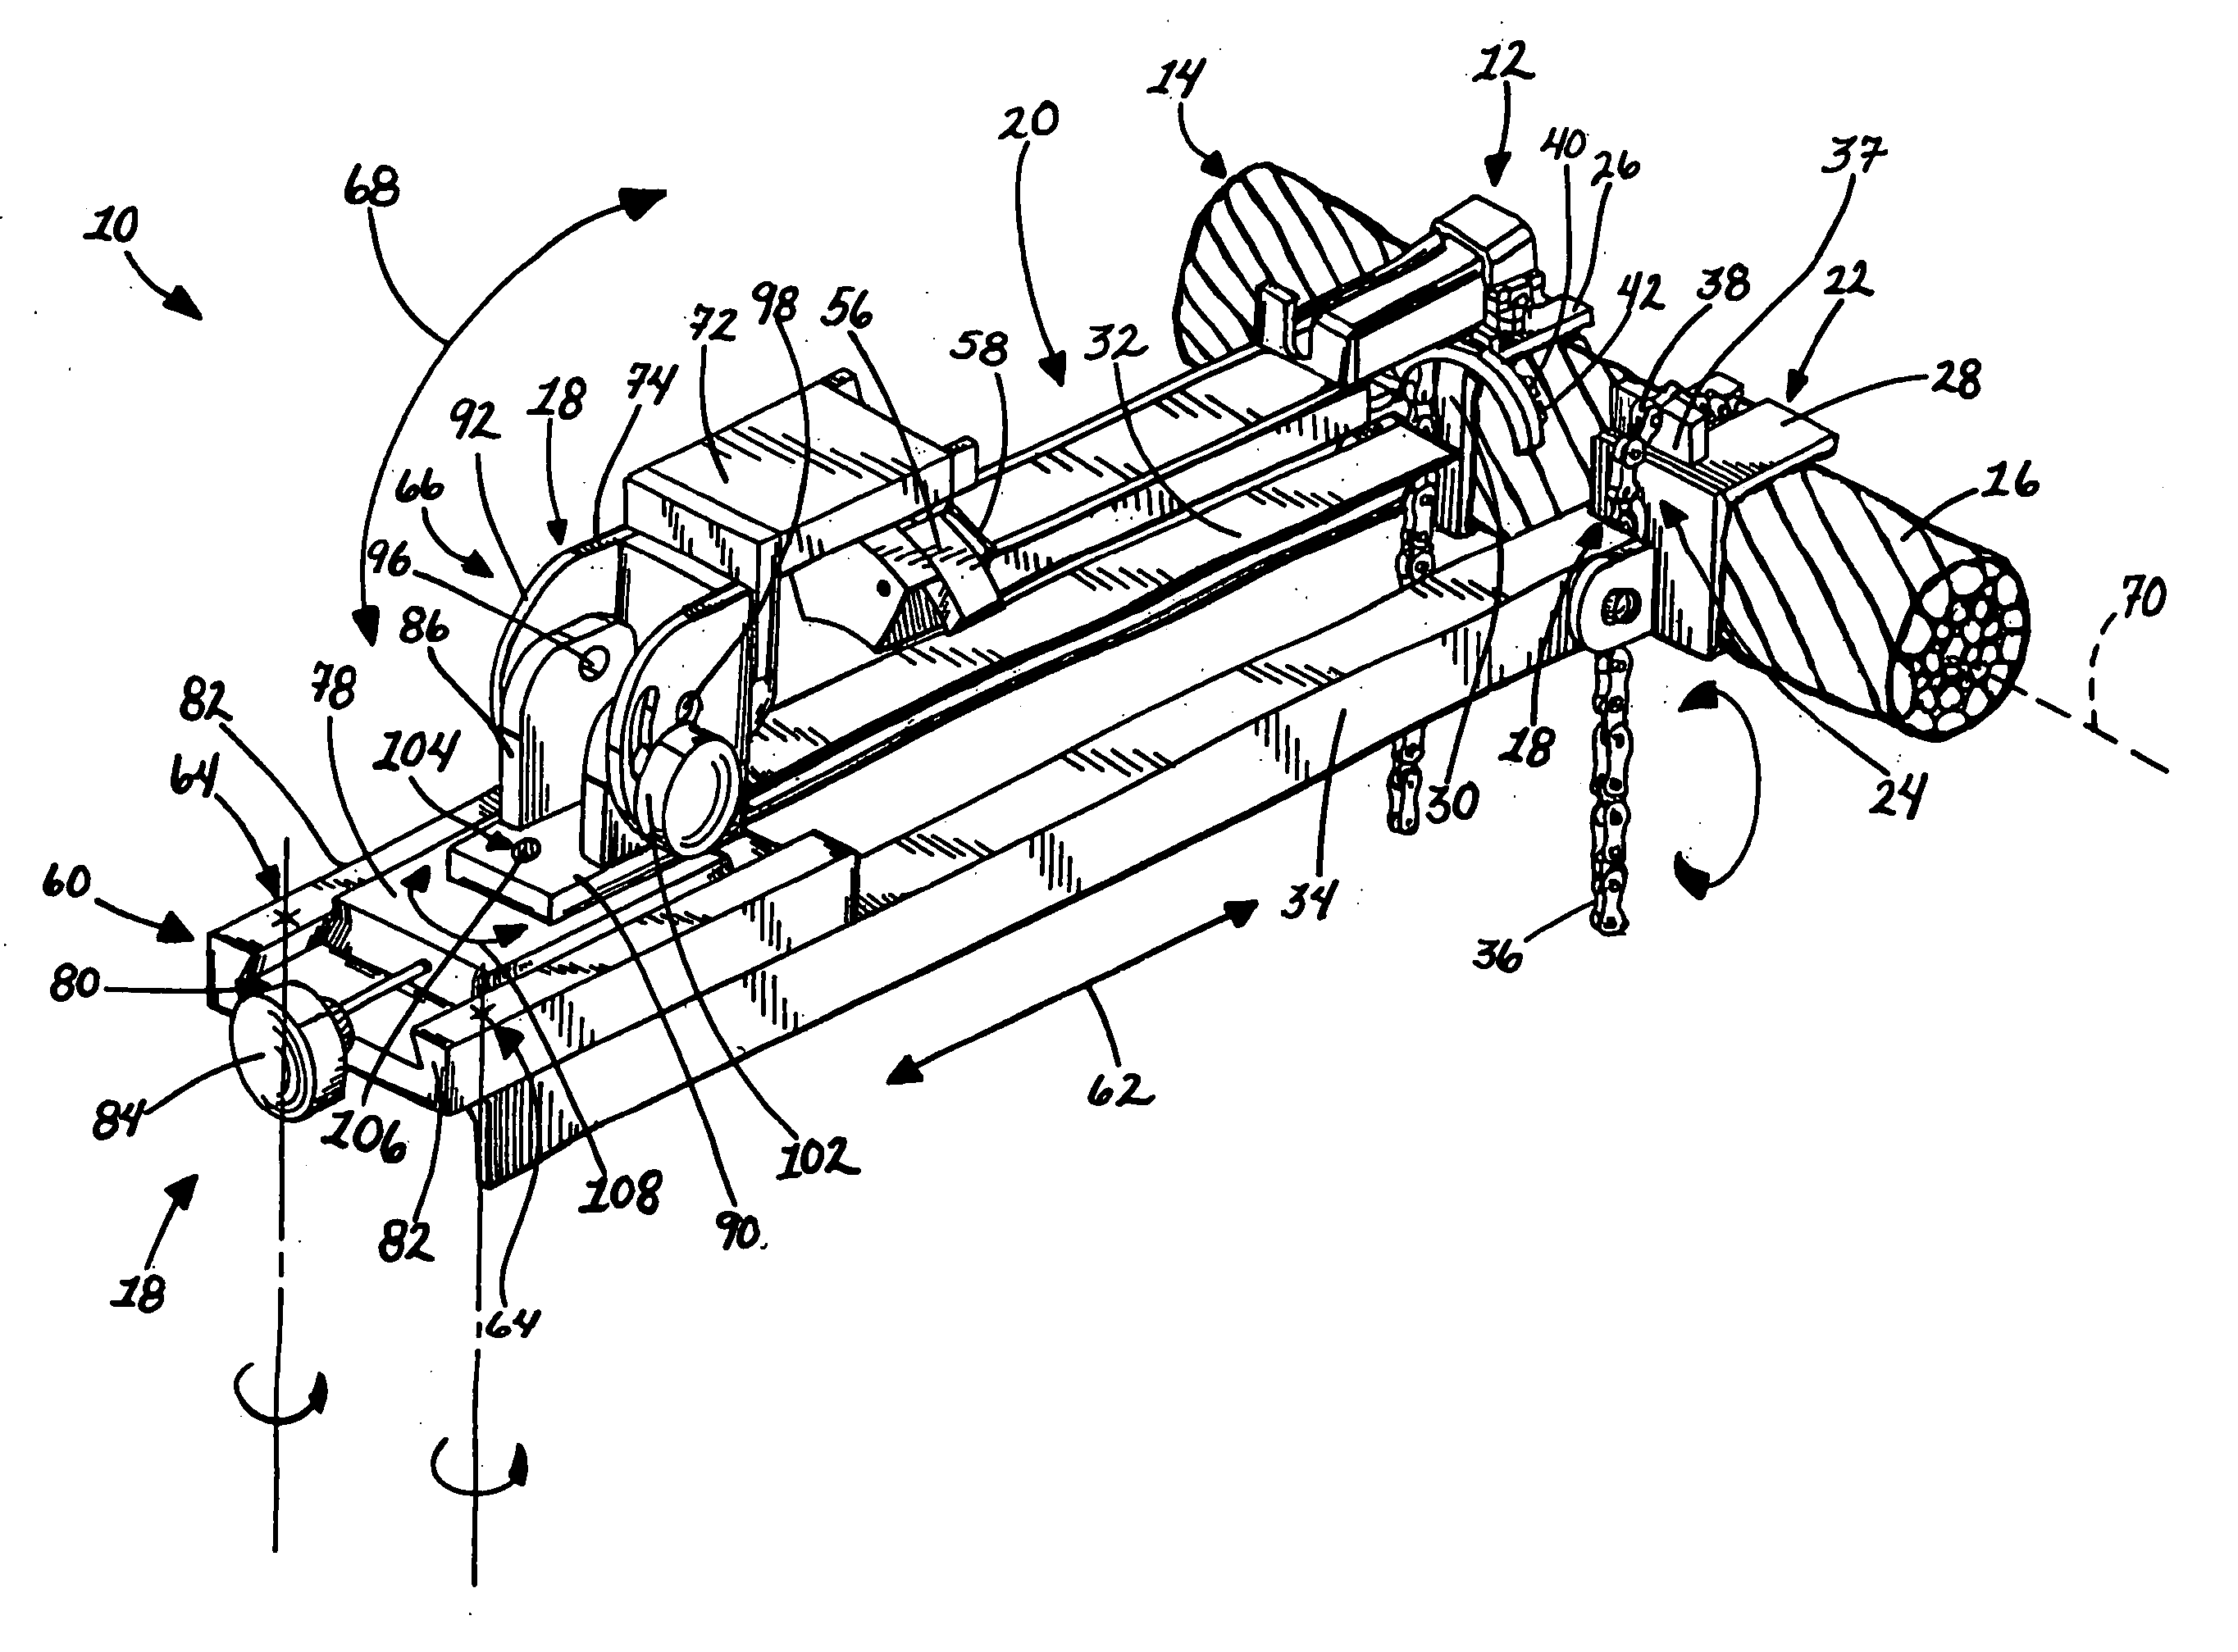 X-ray diffraction apparatus and method